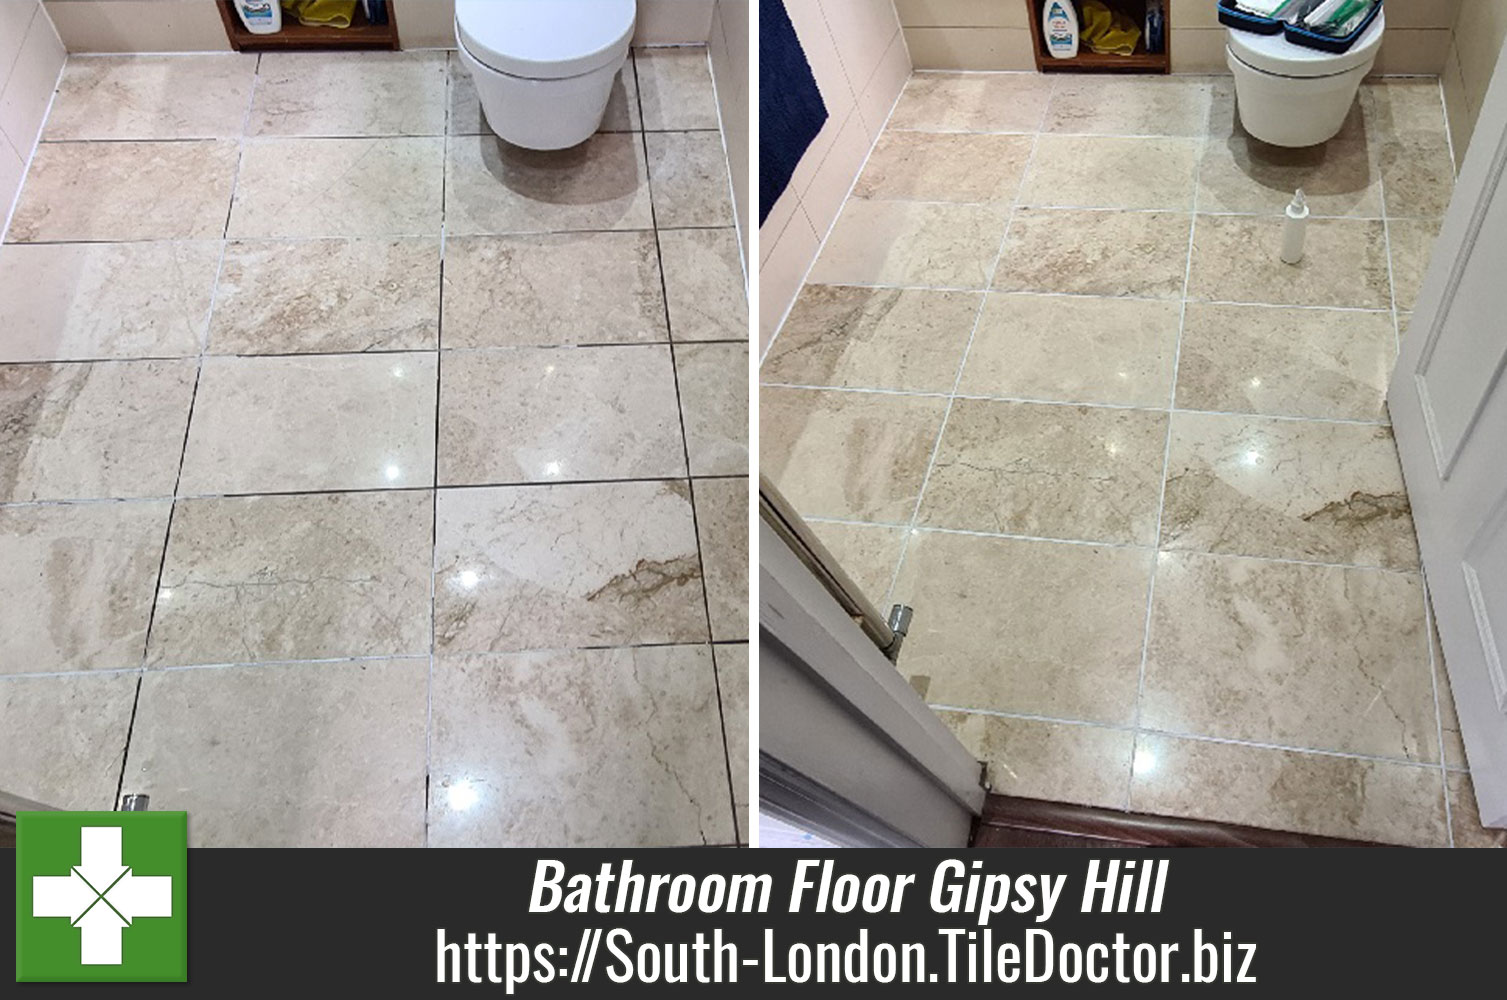 Bathroom Floor Grout Cleaning Colouring Gipsy Hill